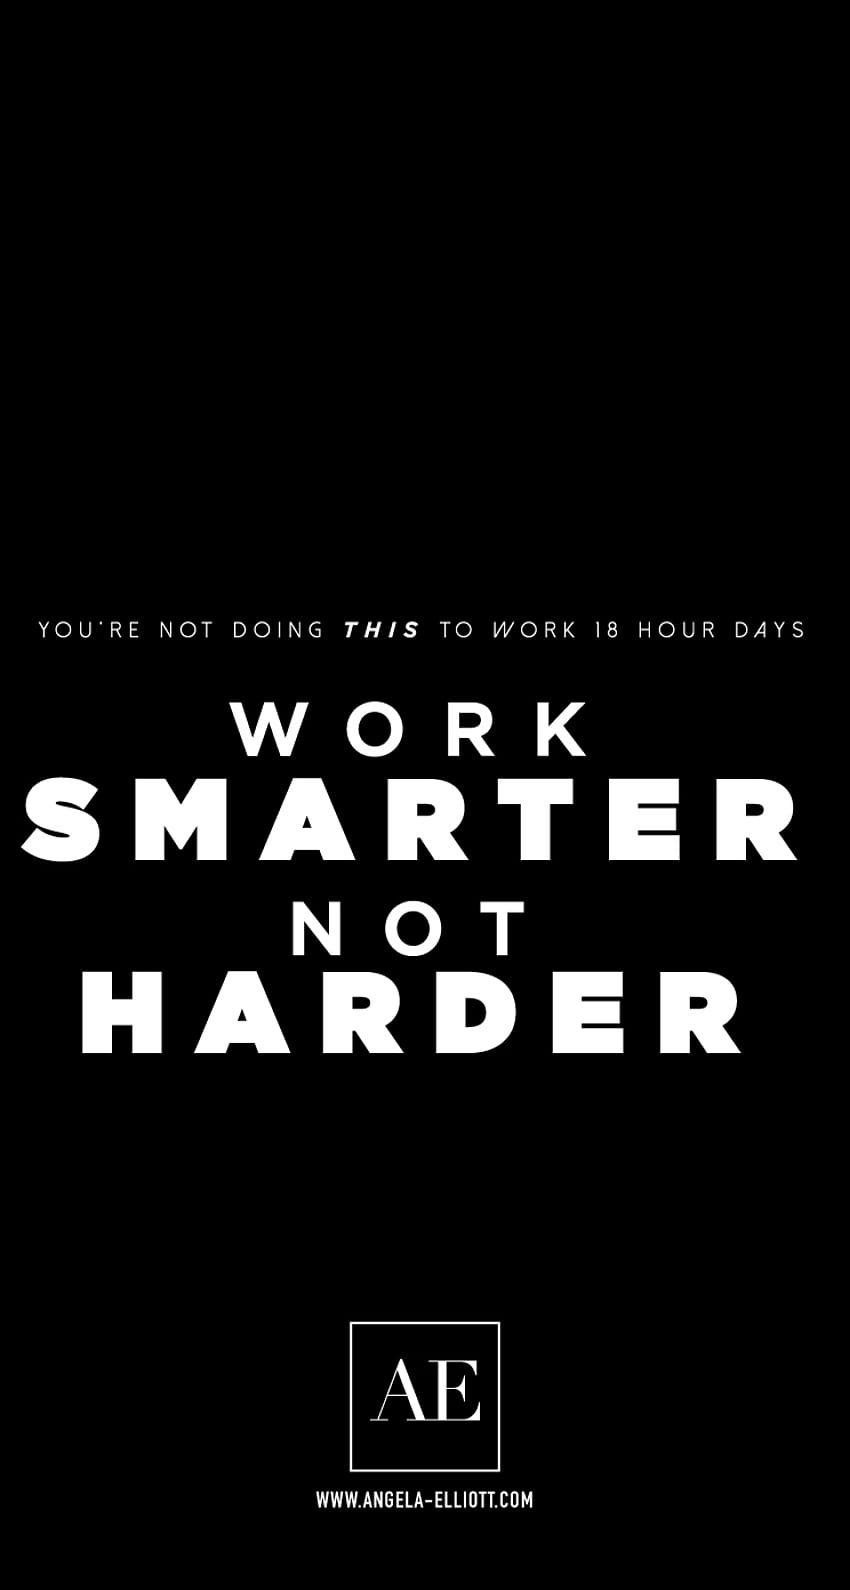 Work Harder posted by Michelle Mercado, smart work HD phone wallpaper